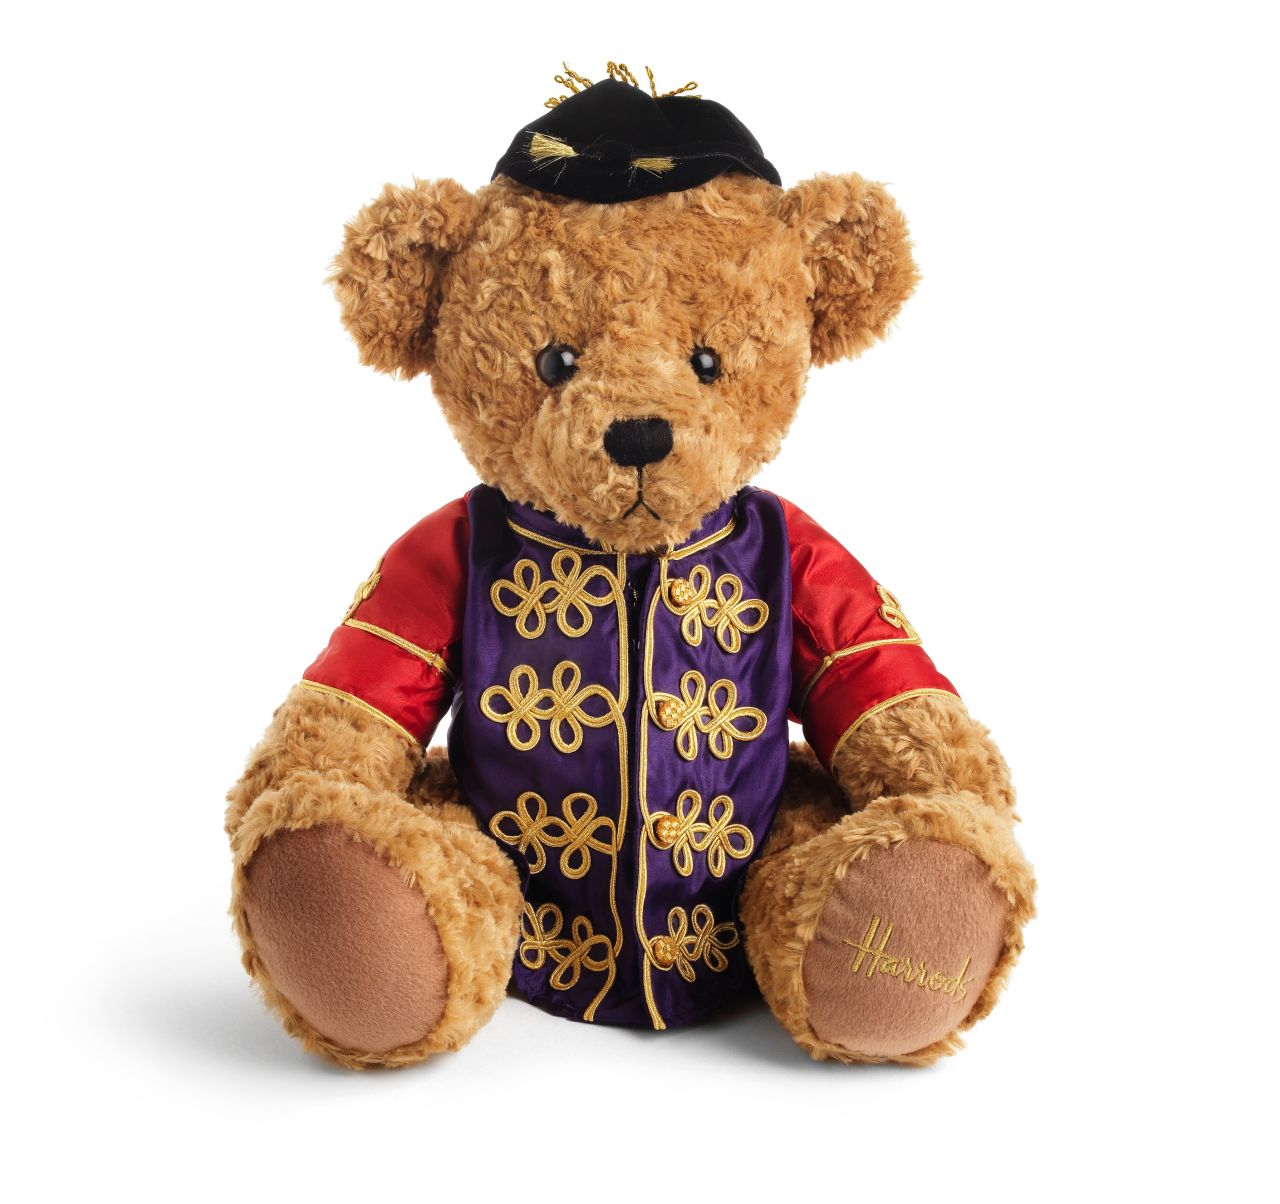 The latest addition to the British royal family, Prince George of Cambridge, was gifted a teddy dressed in the queen's silks, by a leading horse racing organization.   